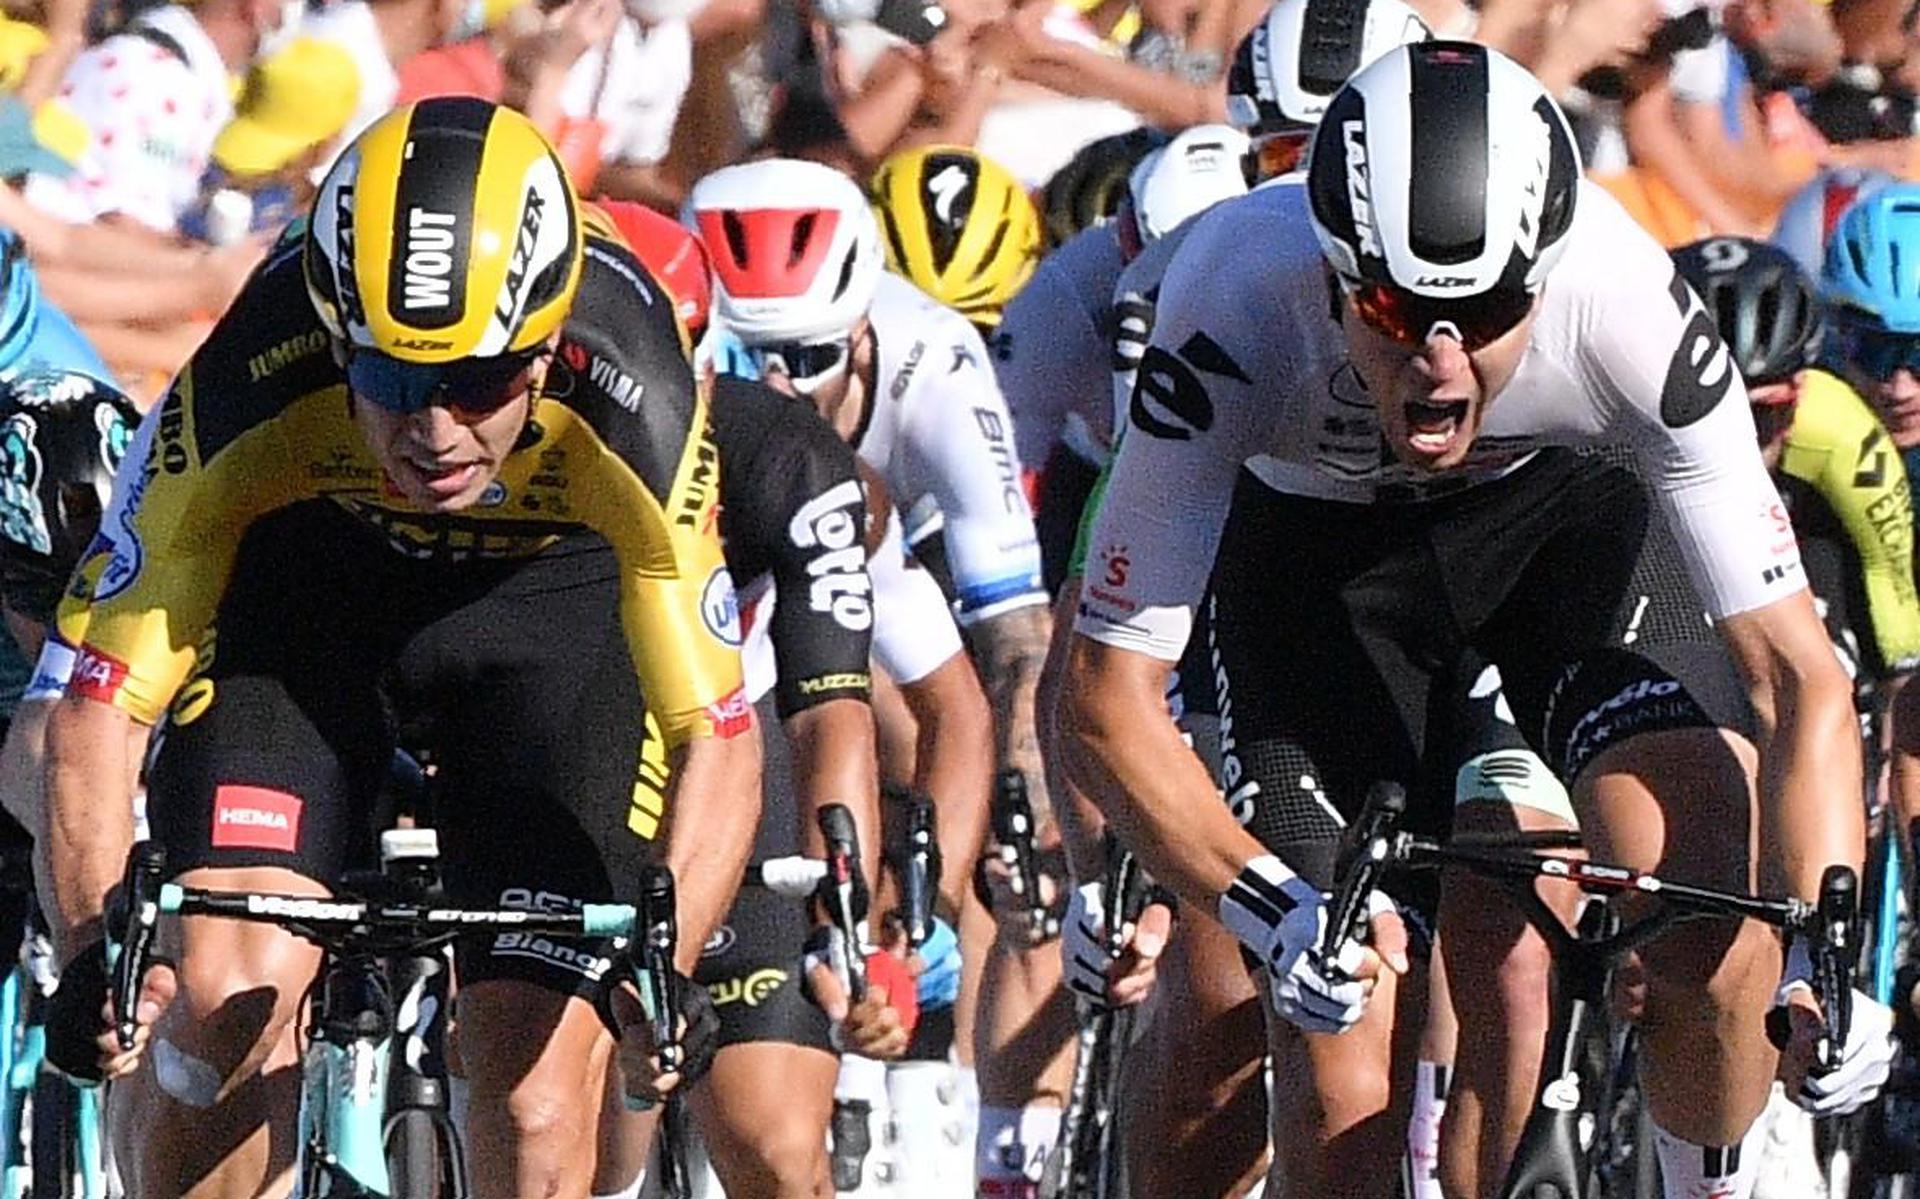 TOPSHOT - Team Jumbo rider Belgium's Wout van Aert (C-L) sprints to cross the finish line ahead of Team Sunweb rider Netherlands' Cees Bol (C-R) at the end of the 5th stage of the 107th edition of the Tour de France cycling race, 185 km between Gap and Privas, on September 2, 2020. (Photo by Anne-Christine POUJOULAT / various sources / AFP)